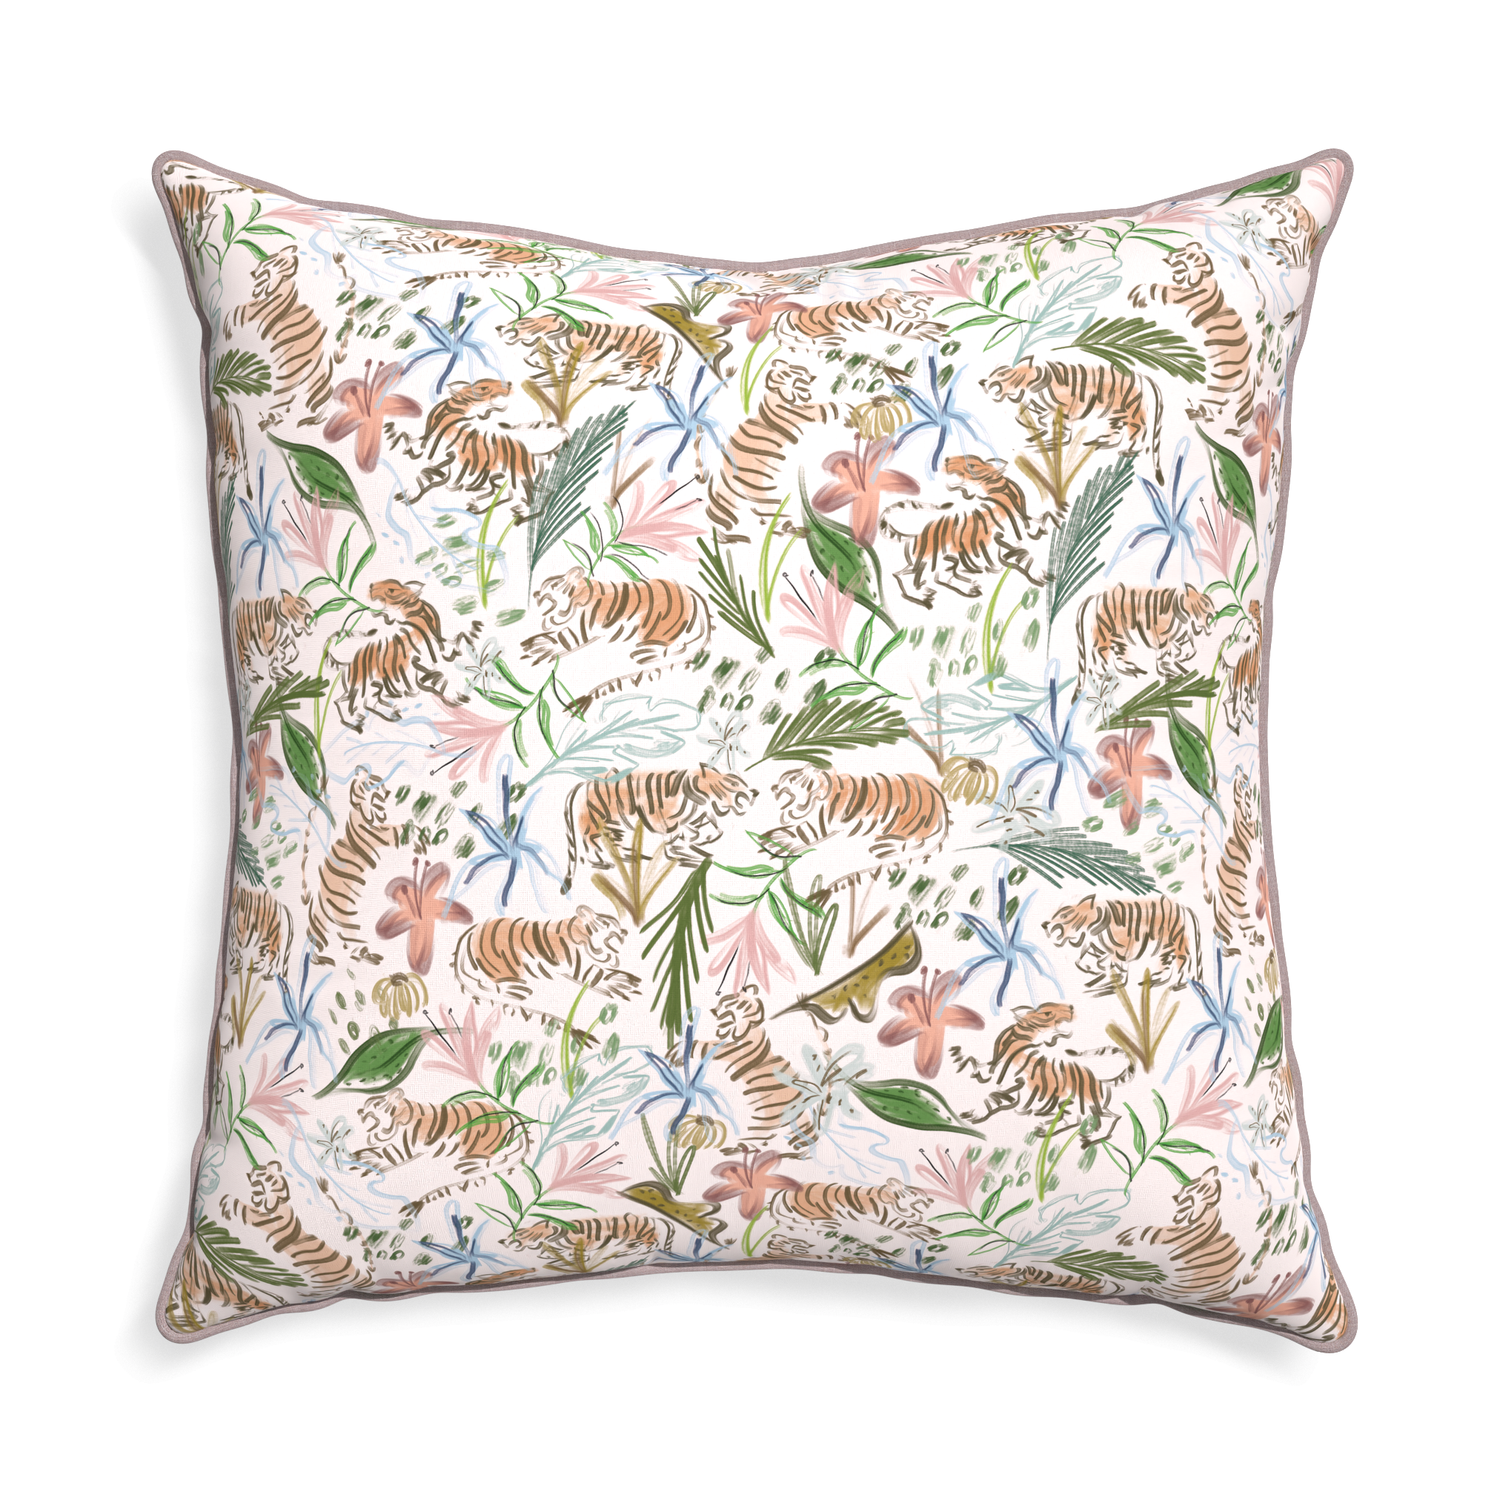 Euro-sham frida pink custom pink chinoiserie tigerpillow with orchid piping on white background